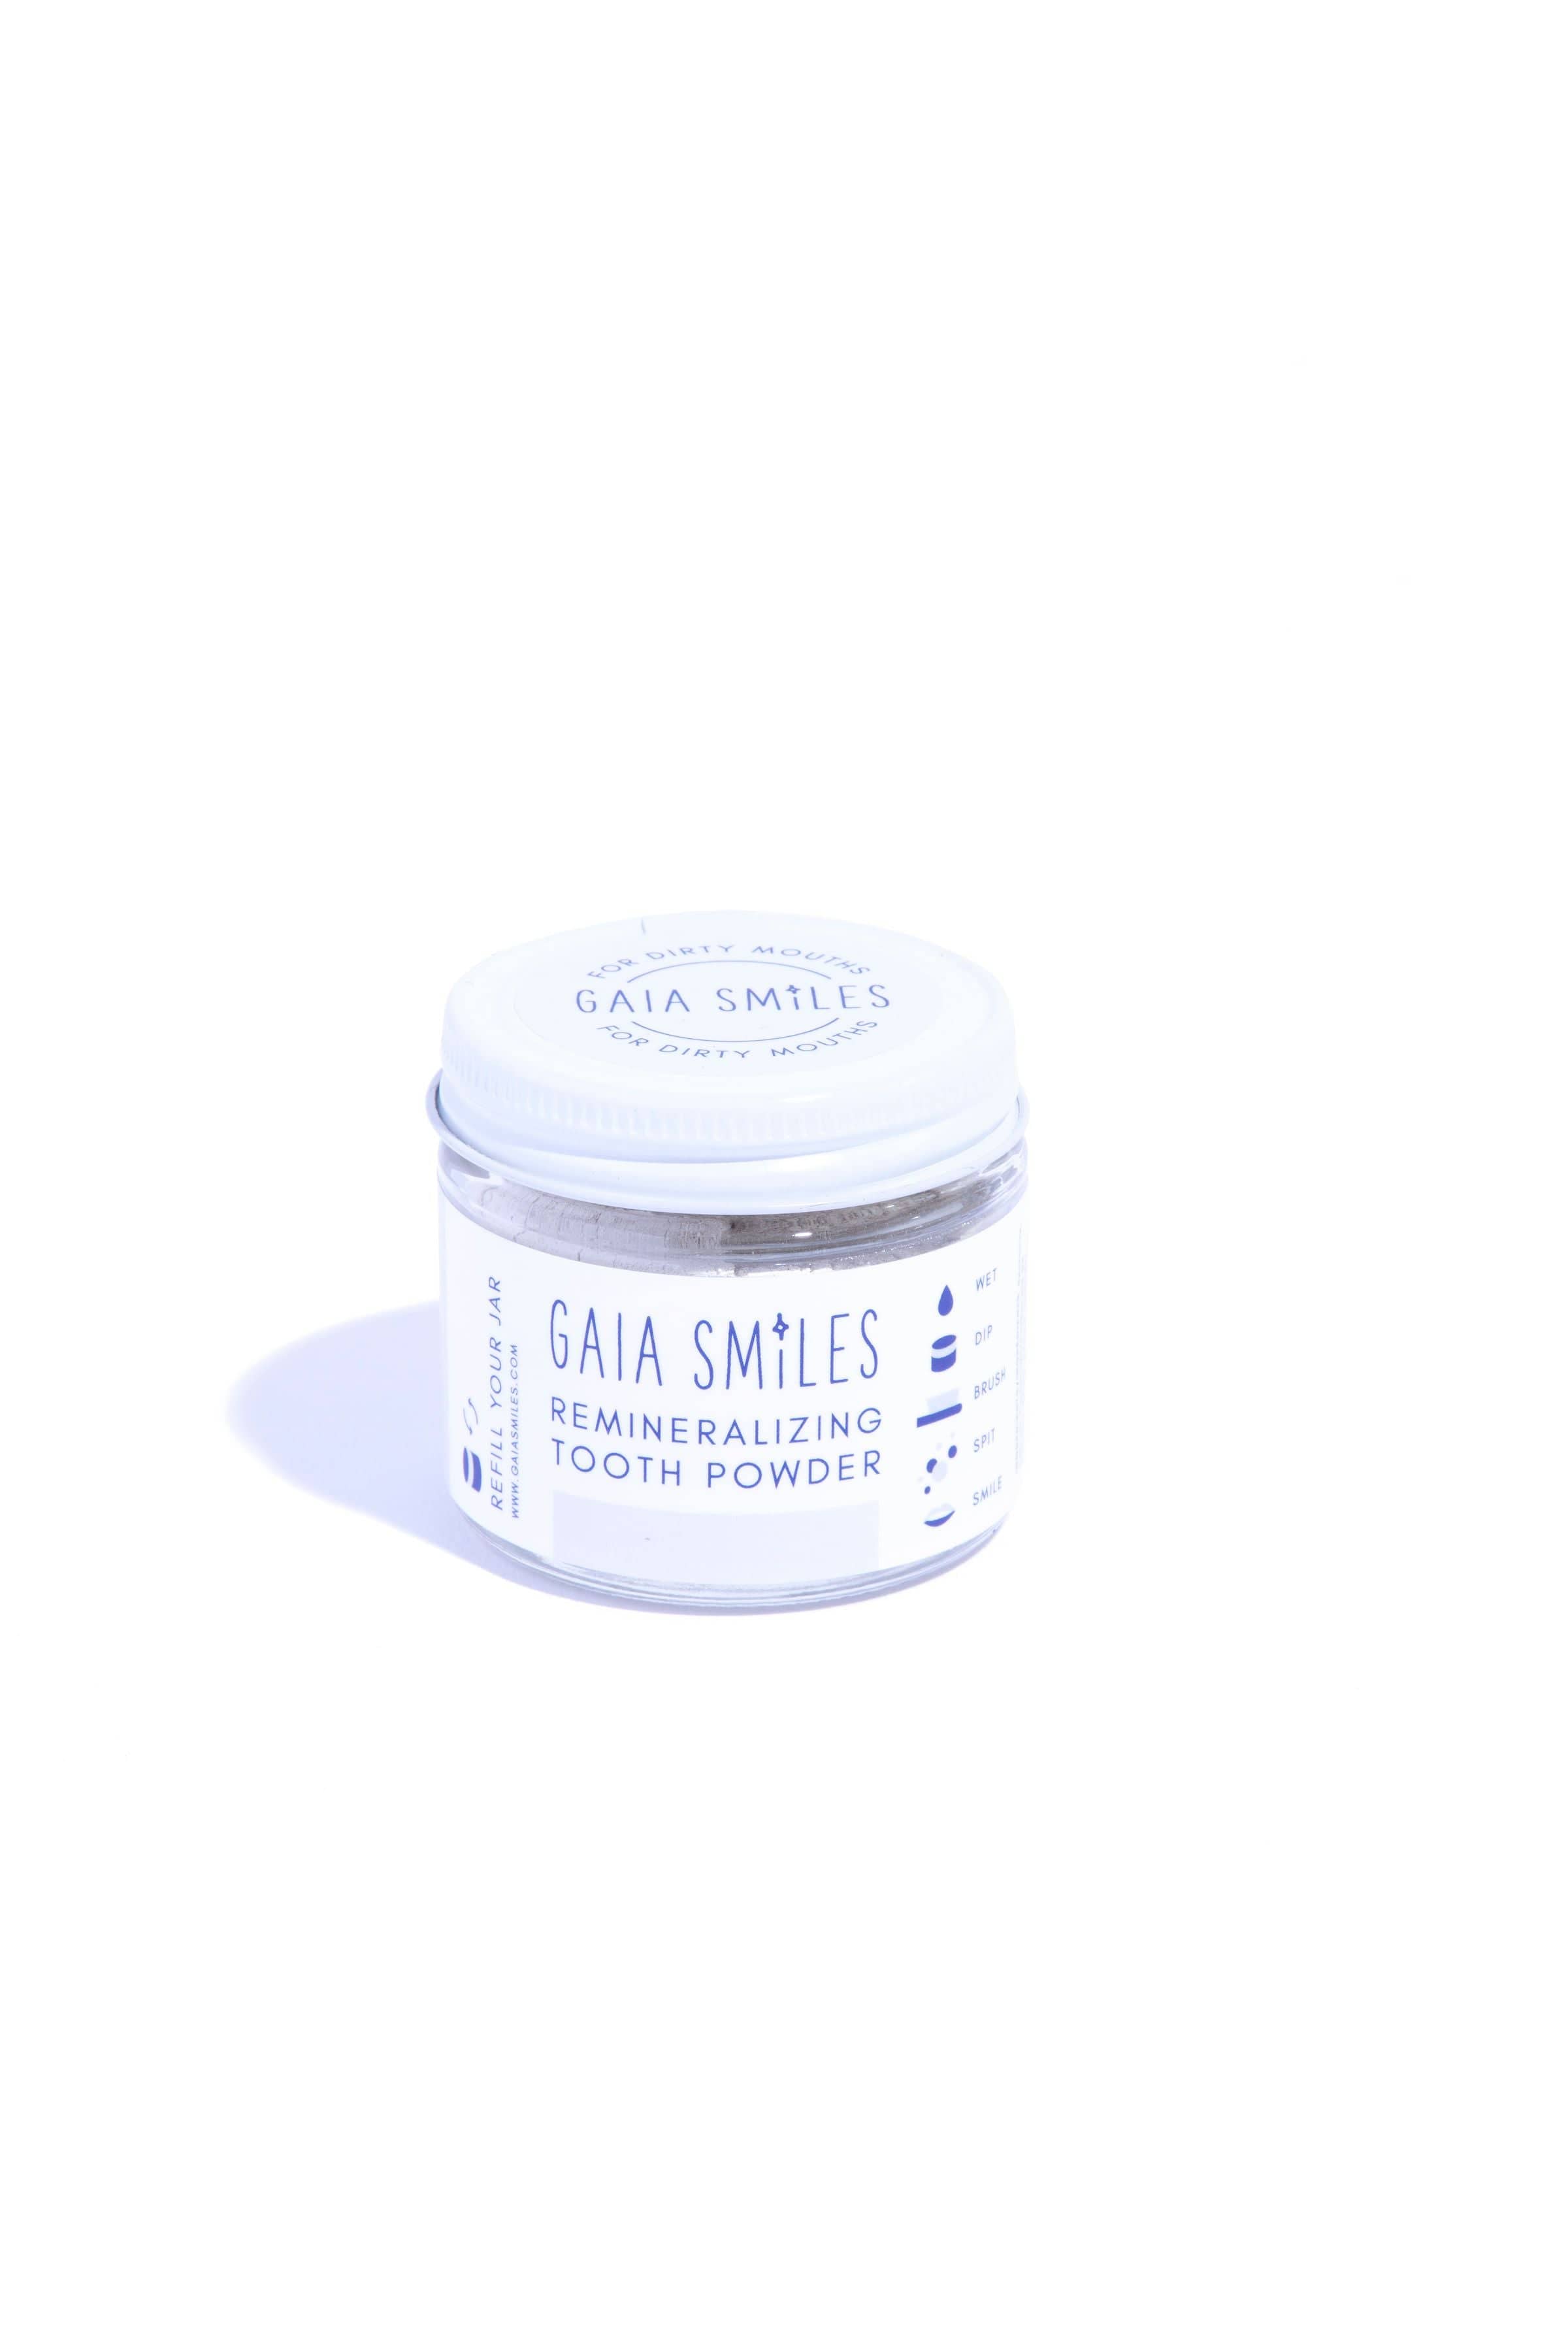 Gaia Smiles Tooth Powder Gaia Smiles,  Remineralizing Tooth Powder Wintergreen, made in Kelowna BC